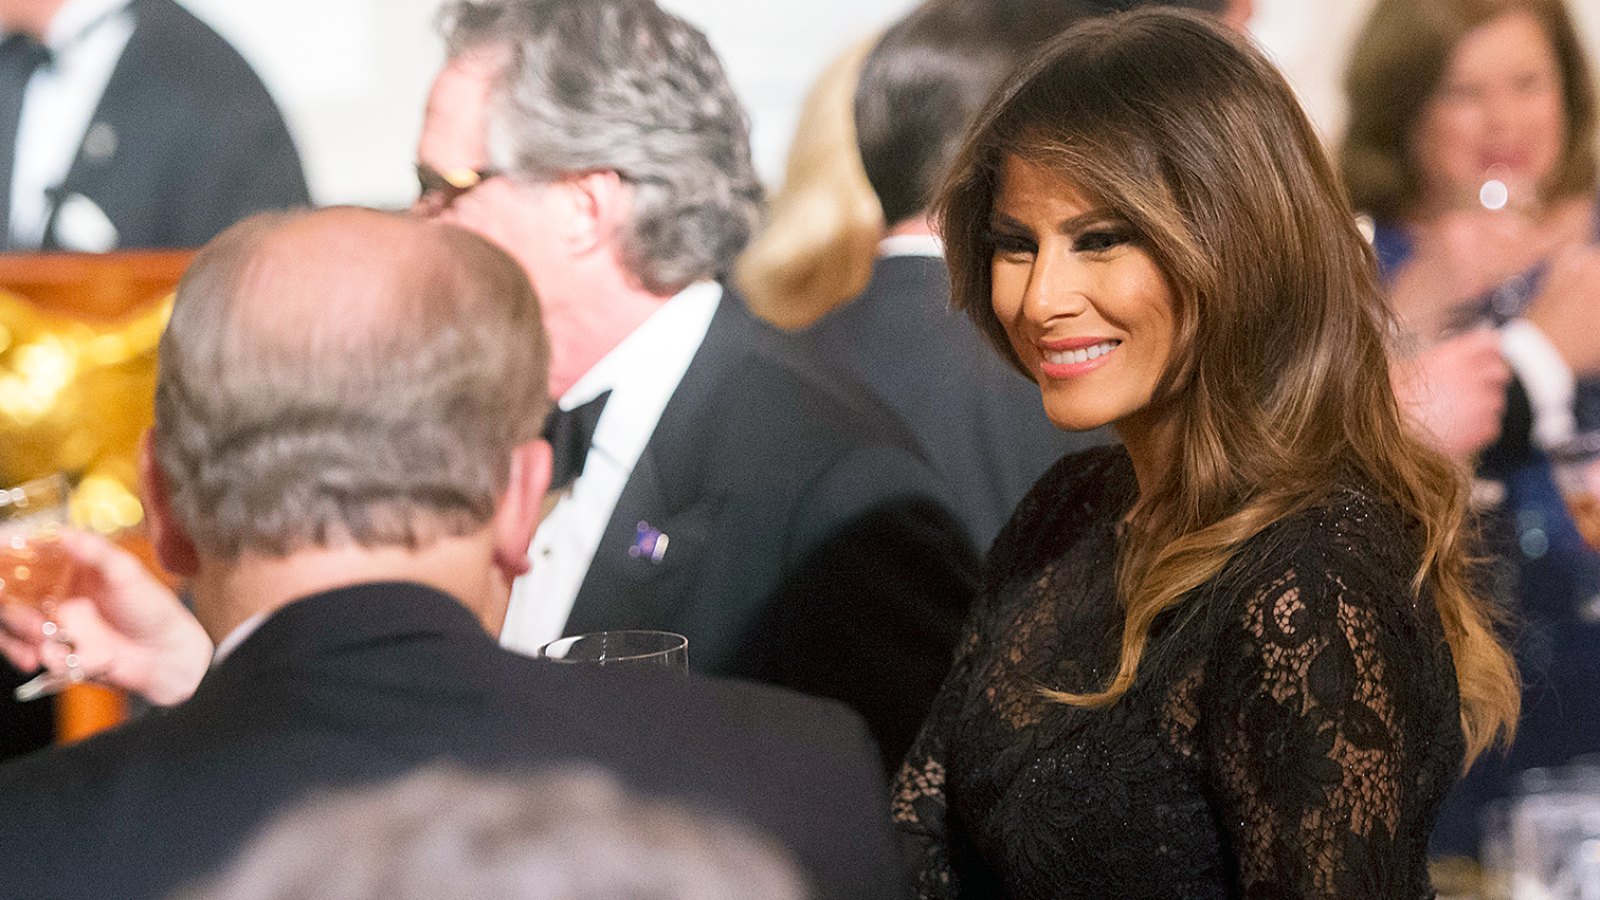 Melania Trump Steps Out After Donald Trump Affair Allegations